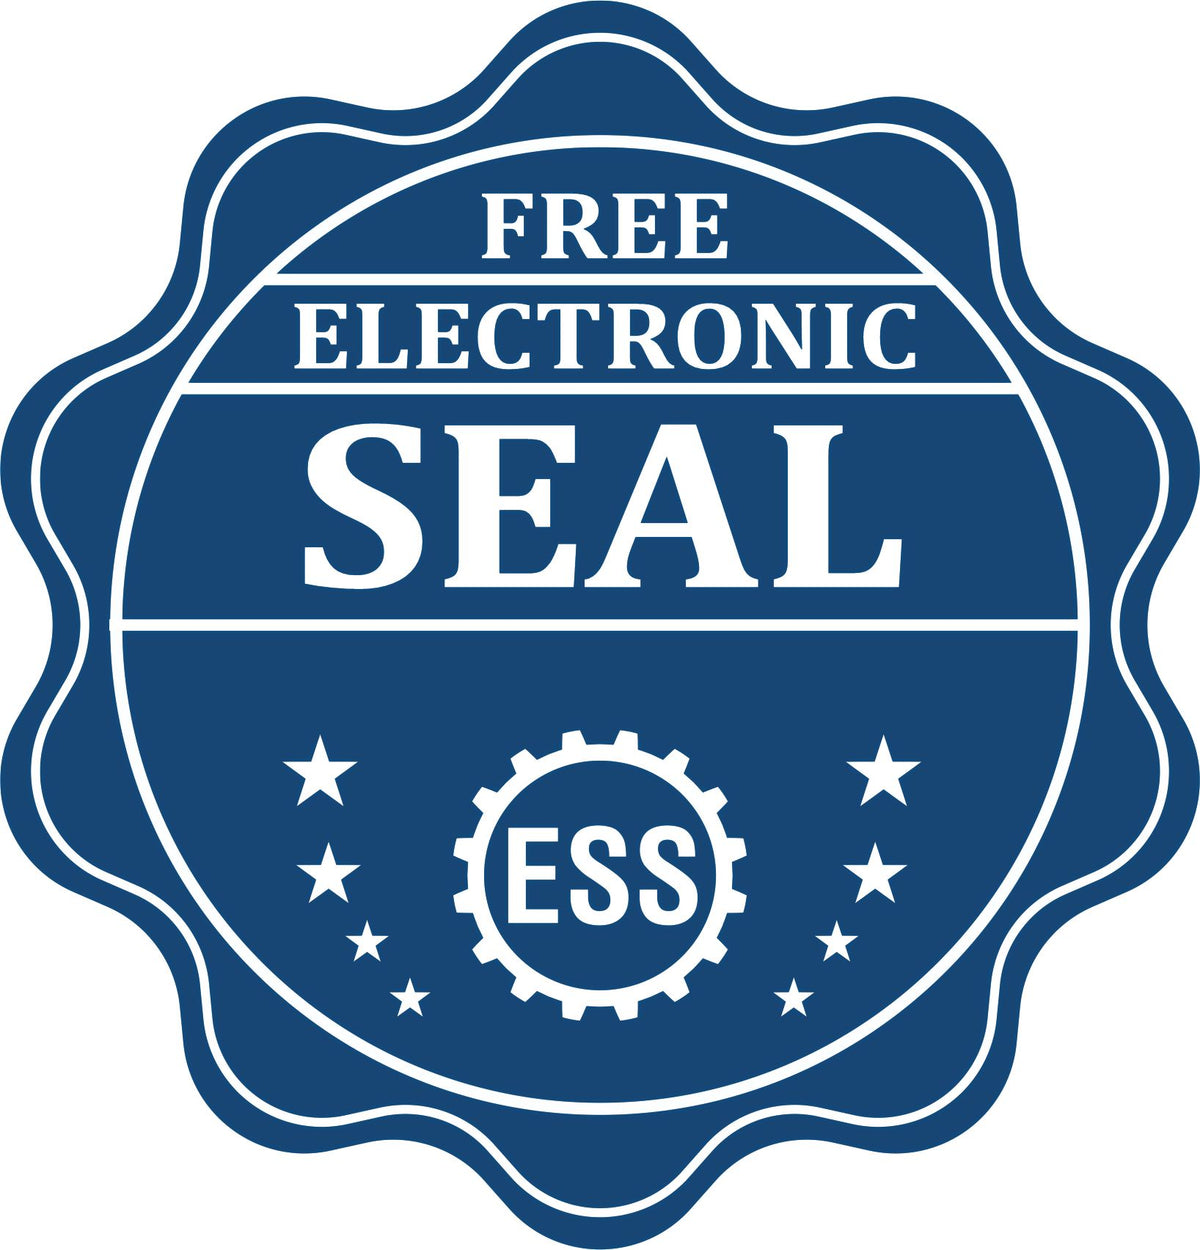 A badge showing a free electronic seal for the State of North Dakota Soft Land Surveyor Embossing Seal with stars and the ESS gear on the emblem.